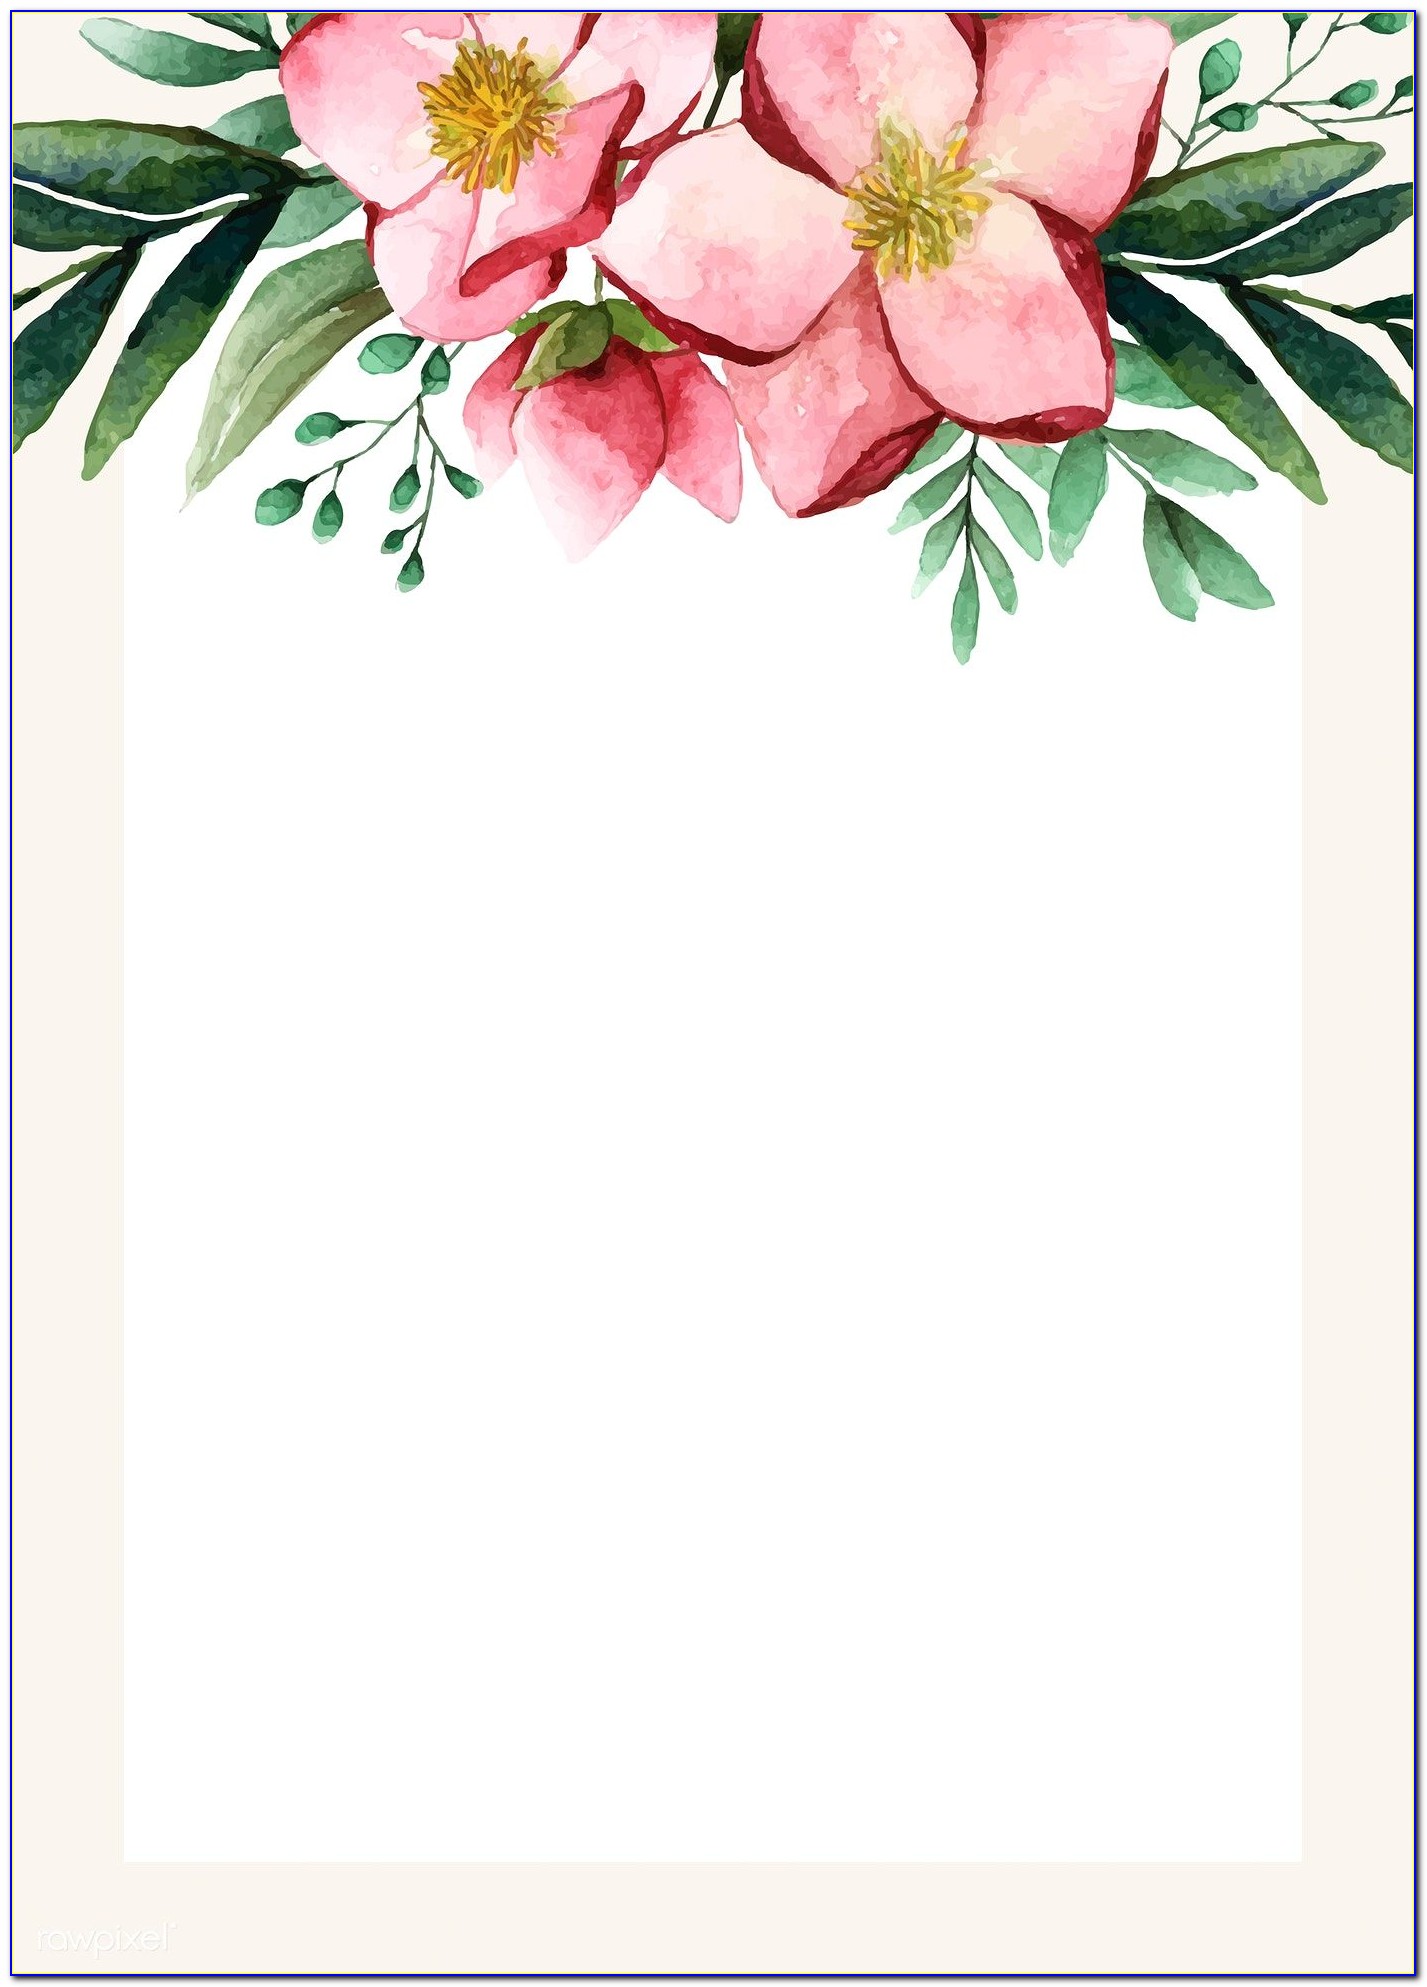 Invitation Card Background Free Download